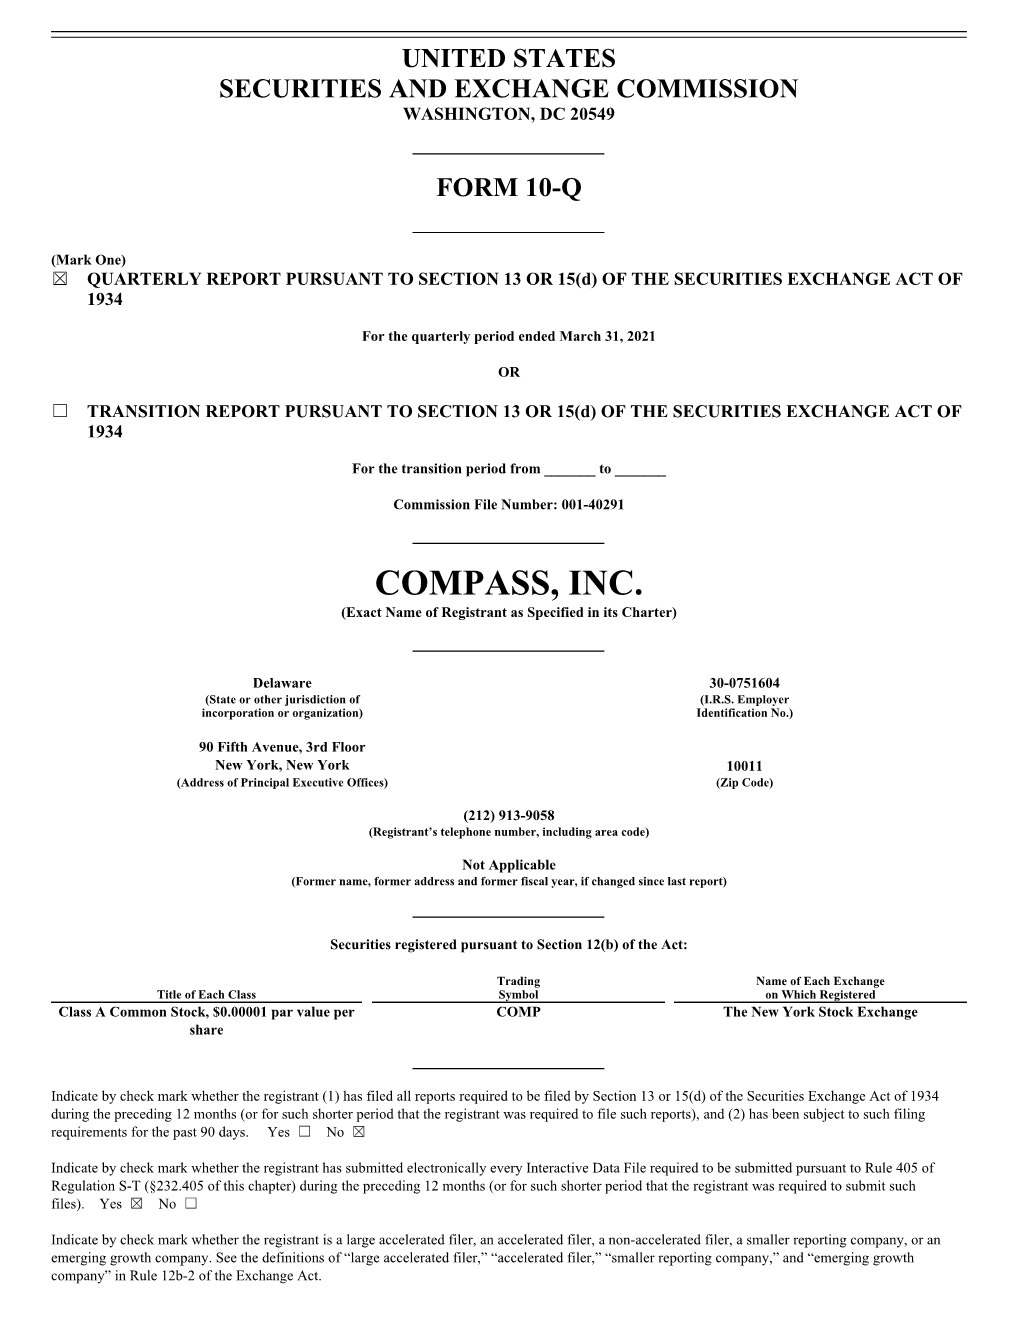 COMPASS, INC. (Exact Name of Registrant As Specified in Its Charter)